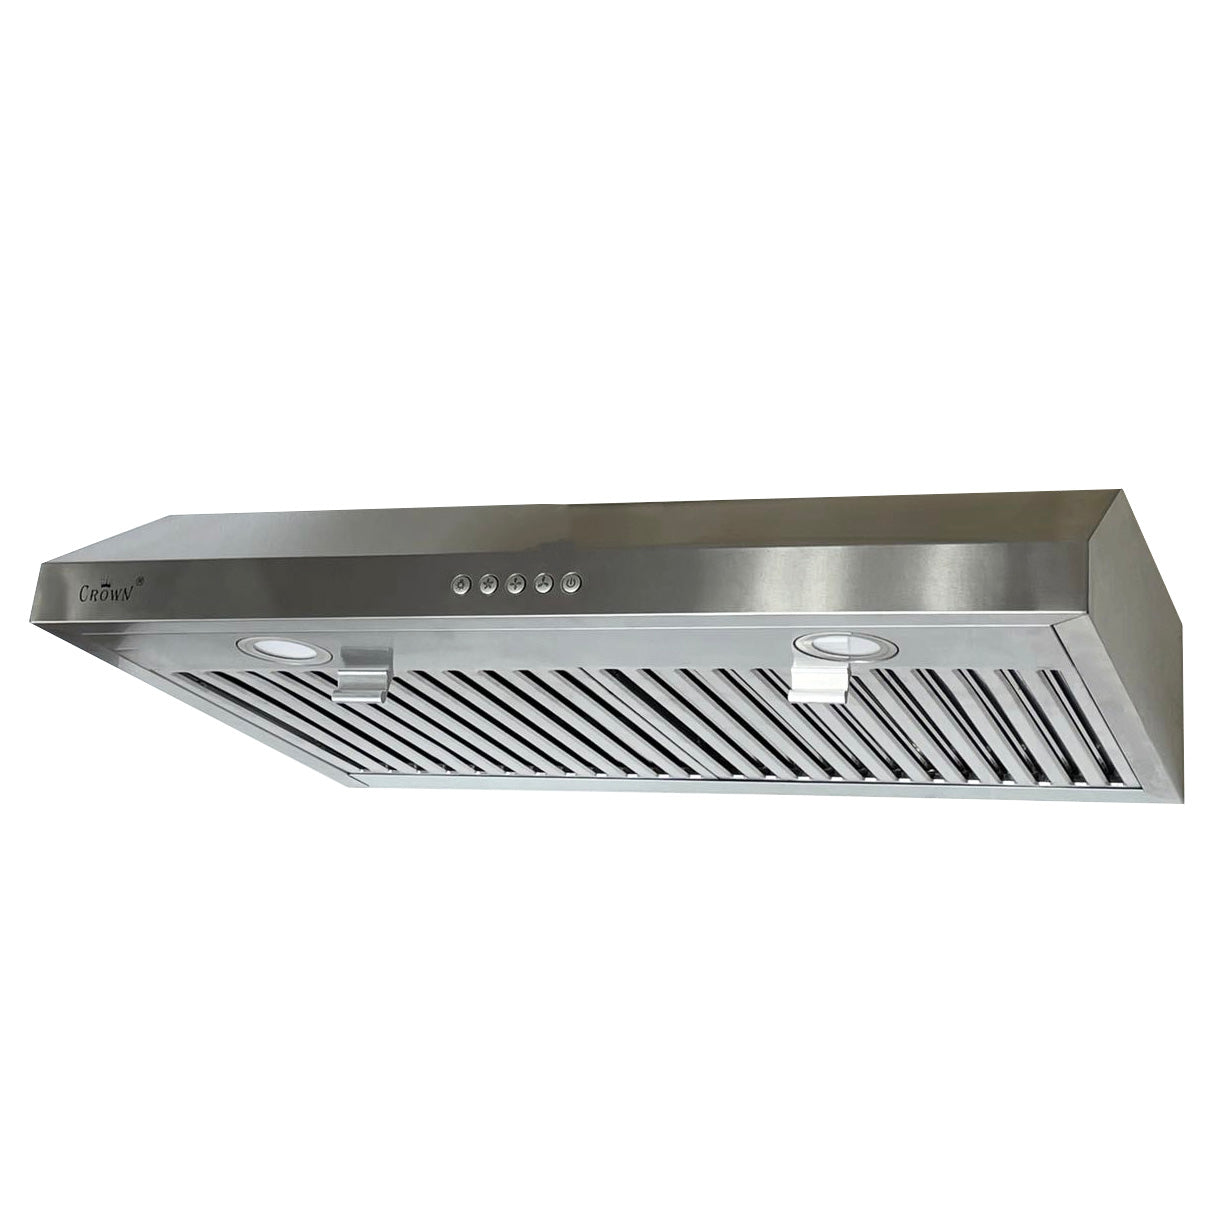 24 Inch Professional Range Hood, 11 Inches Tall - THOR Kitchen